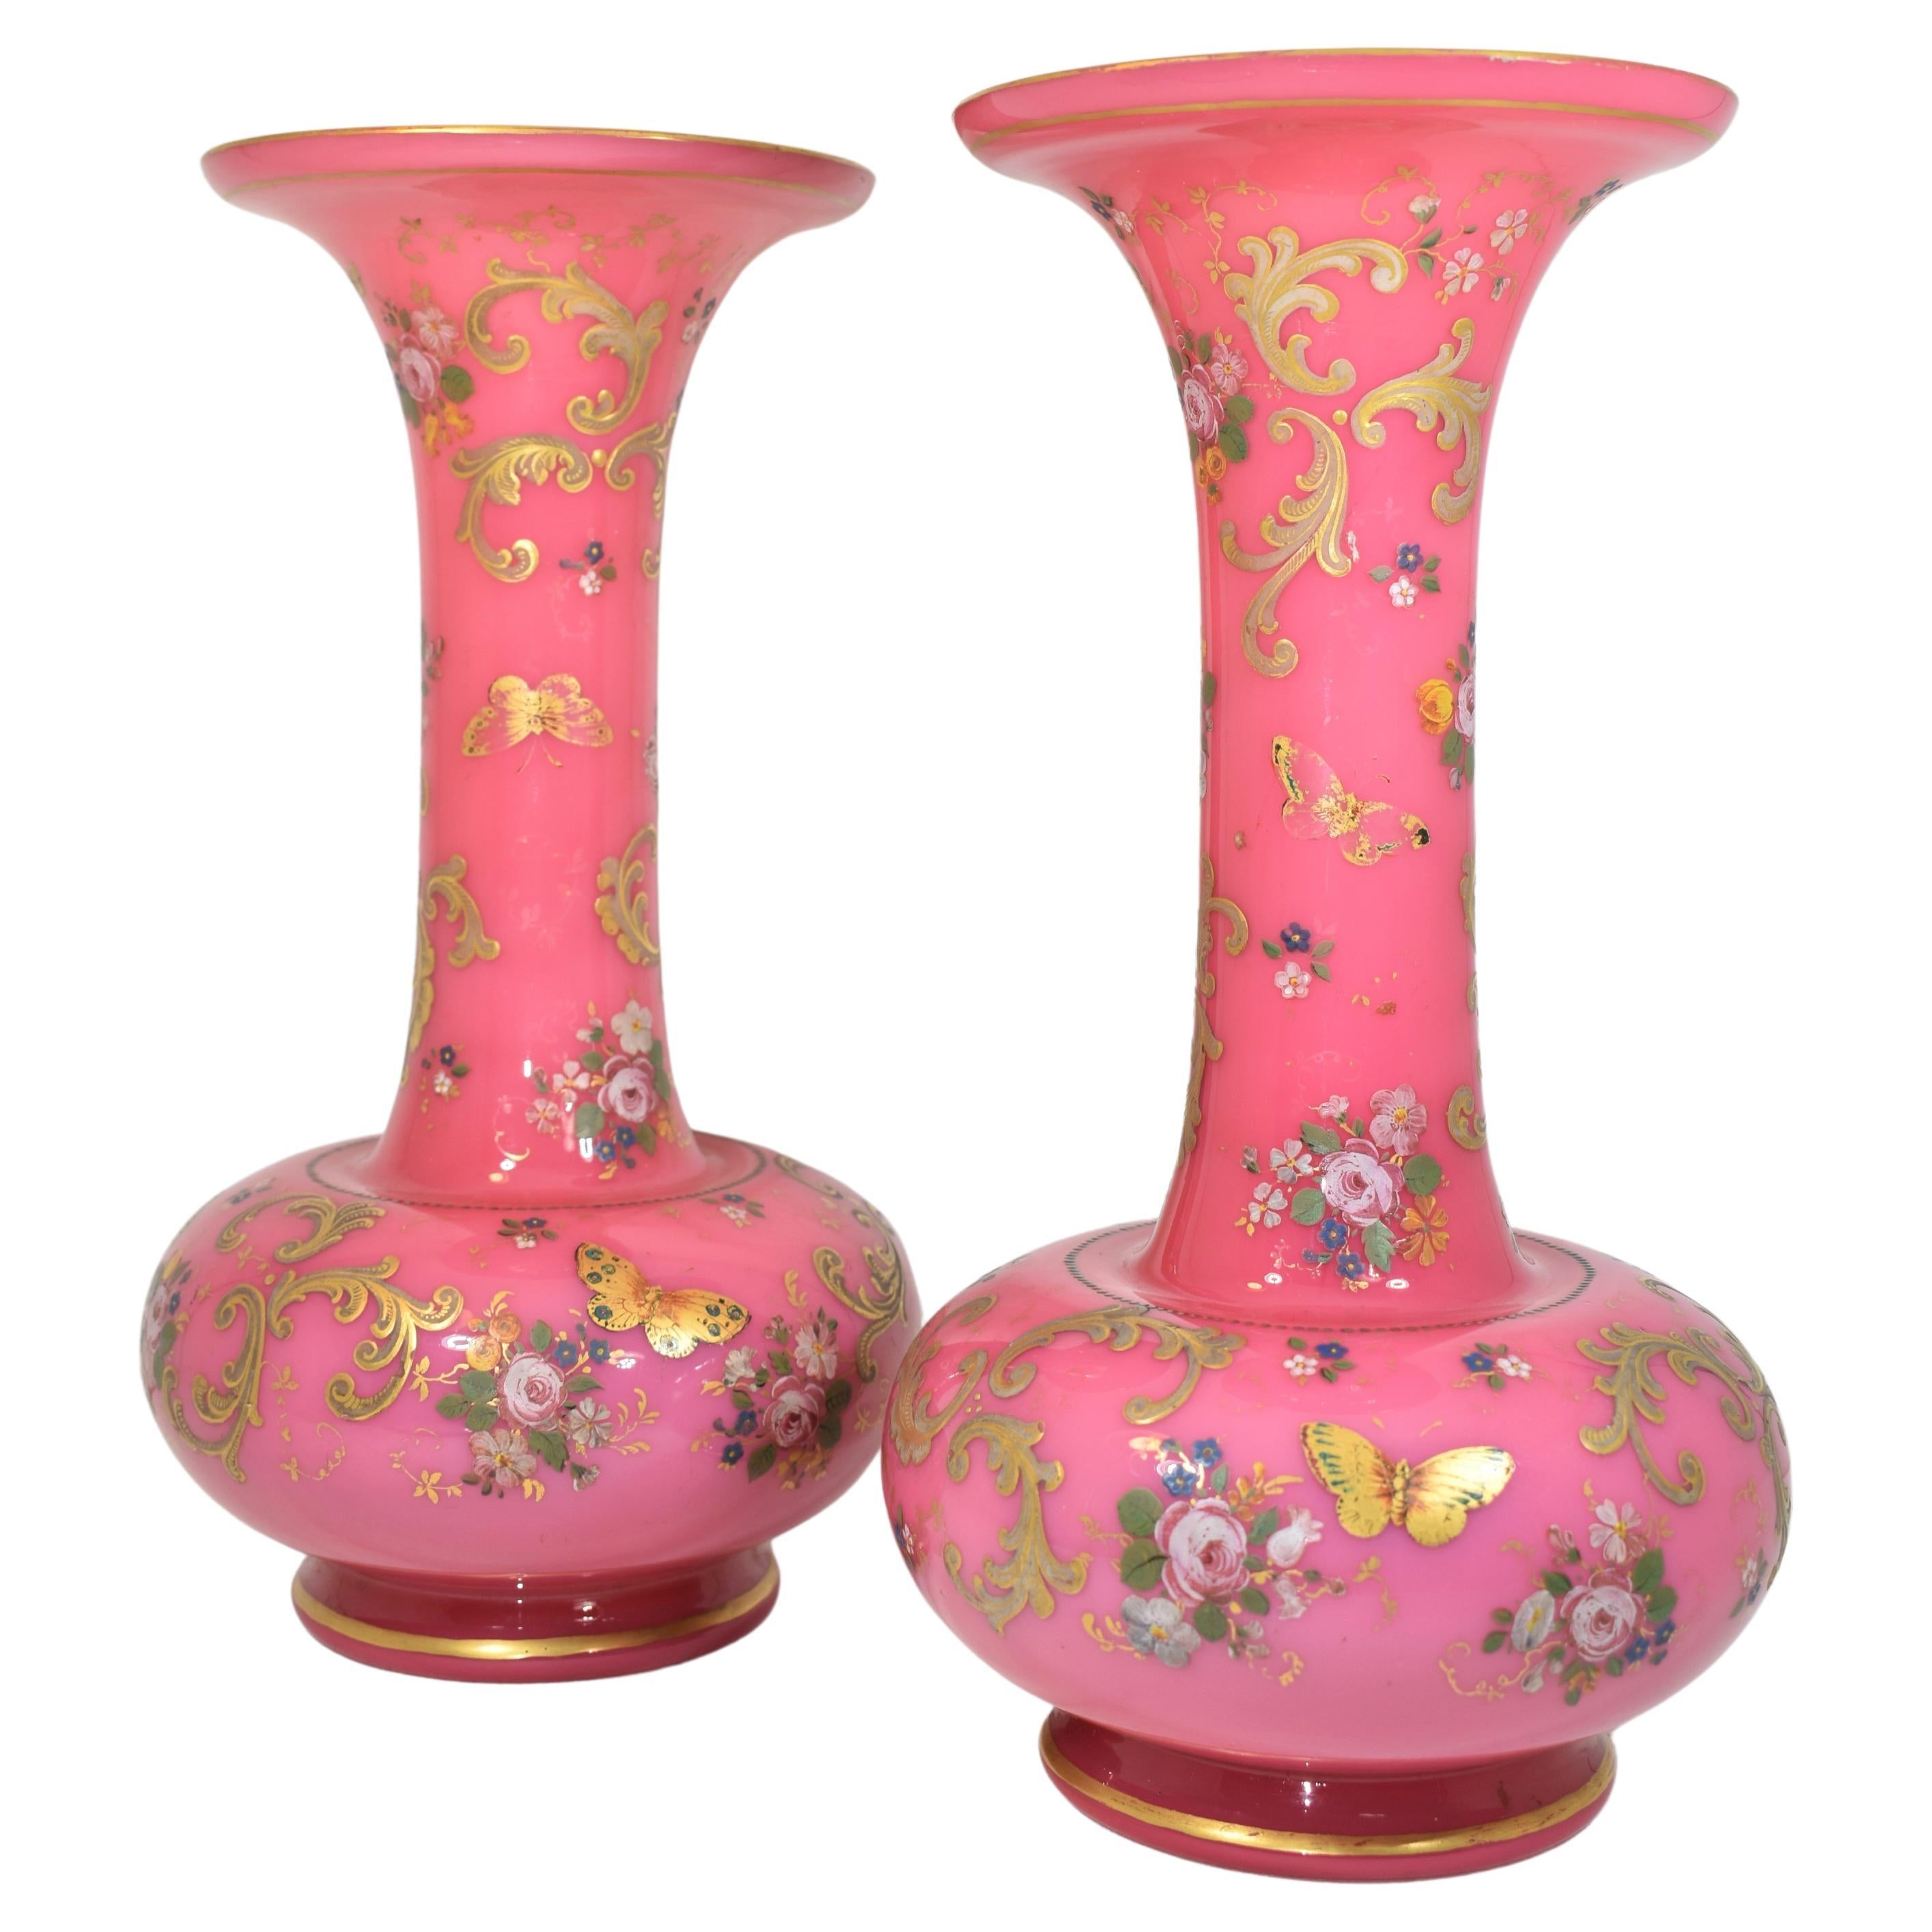 An exeptional pair of vases made of two-layers enamelled opaline glass, opaque white on the inside and pink on the outside, the circular bodies richly hand-painted all around with gilded enamel decoration, the high quality enamelling features